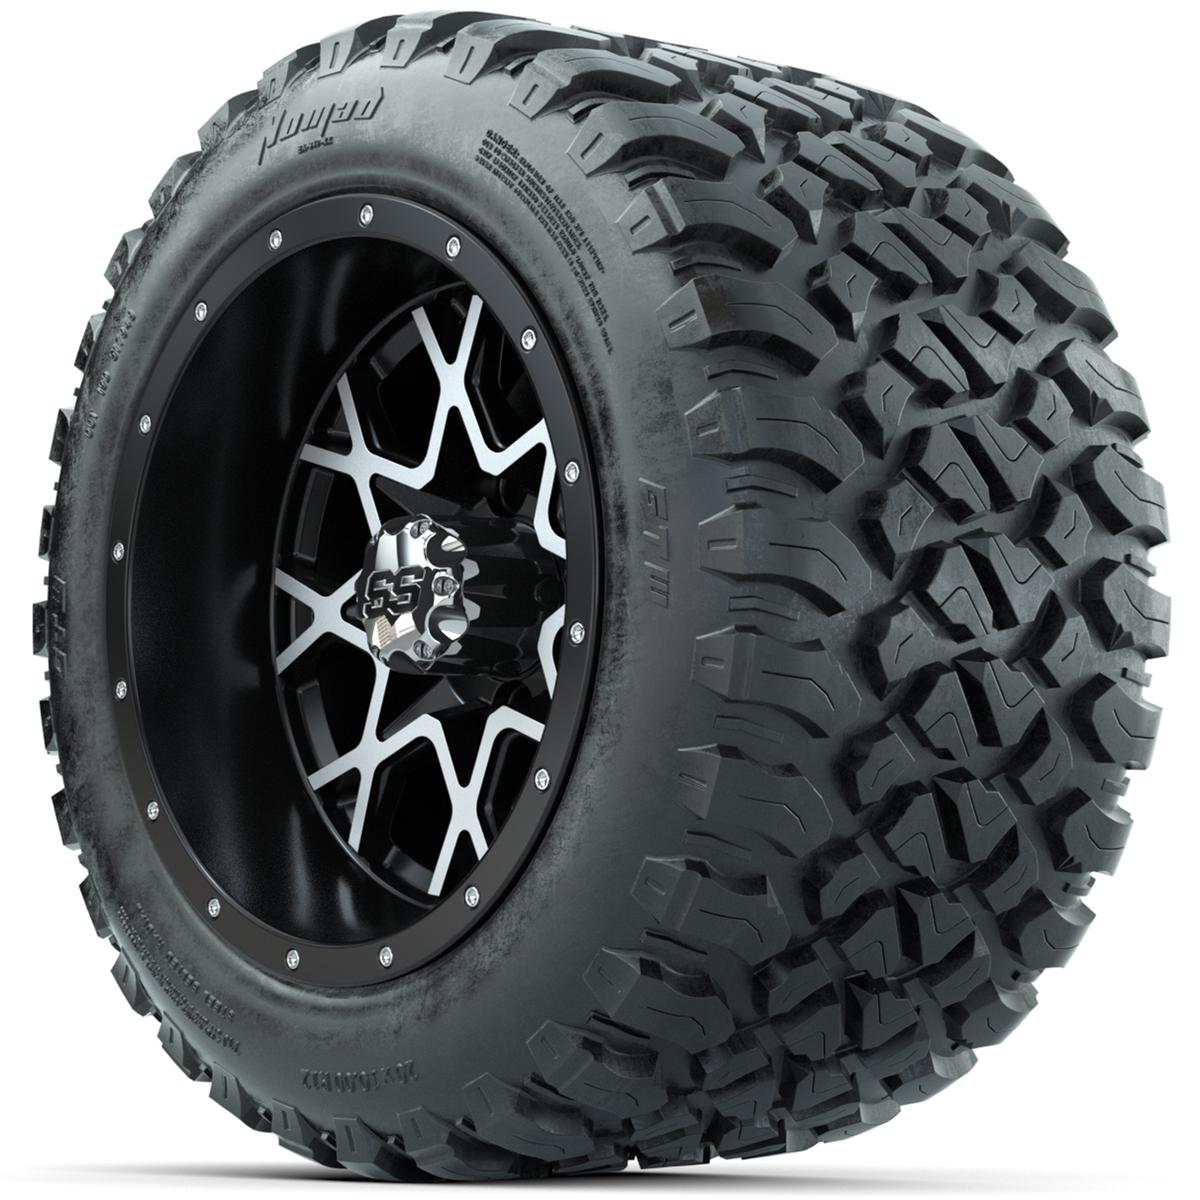 Set of (4) 12 in GTW Vortex Wheels with 20x10-R12 GTW Nomad All-Terrain Tires